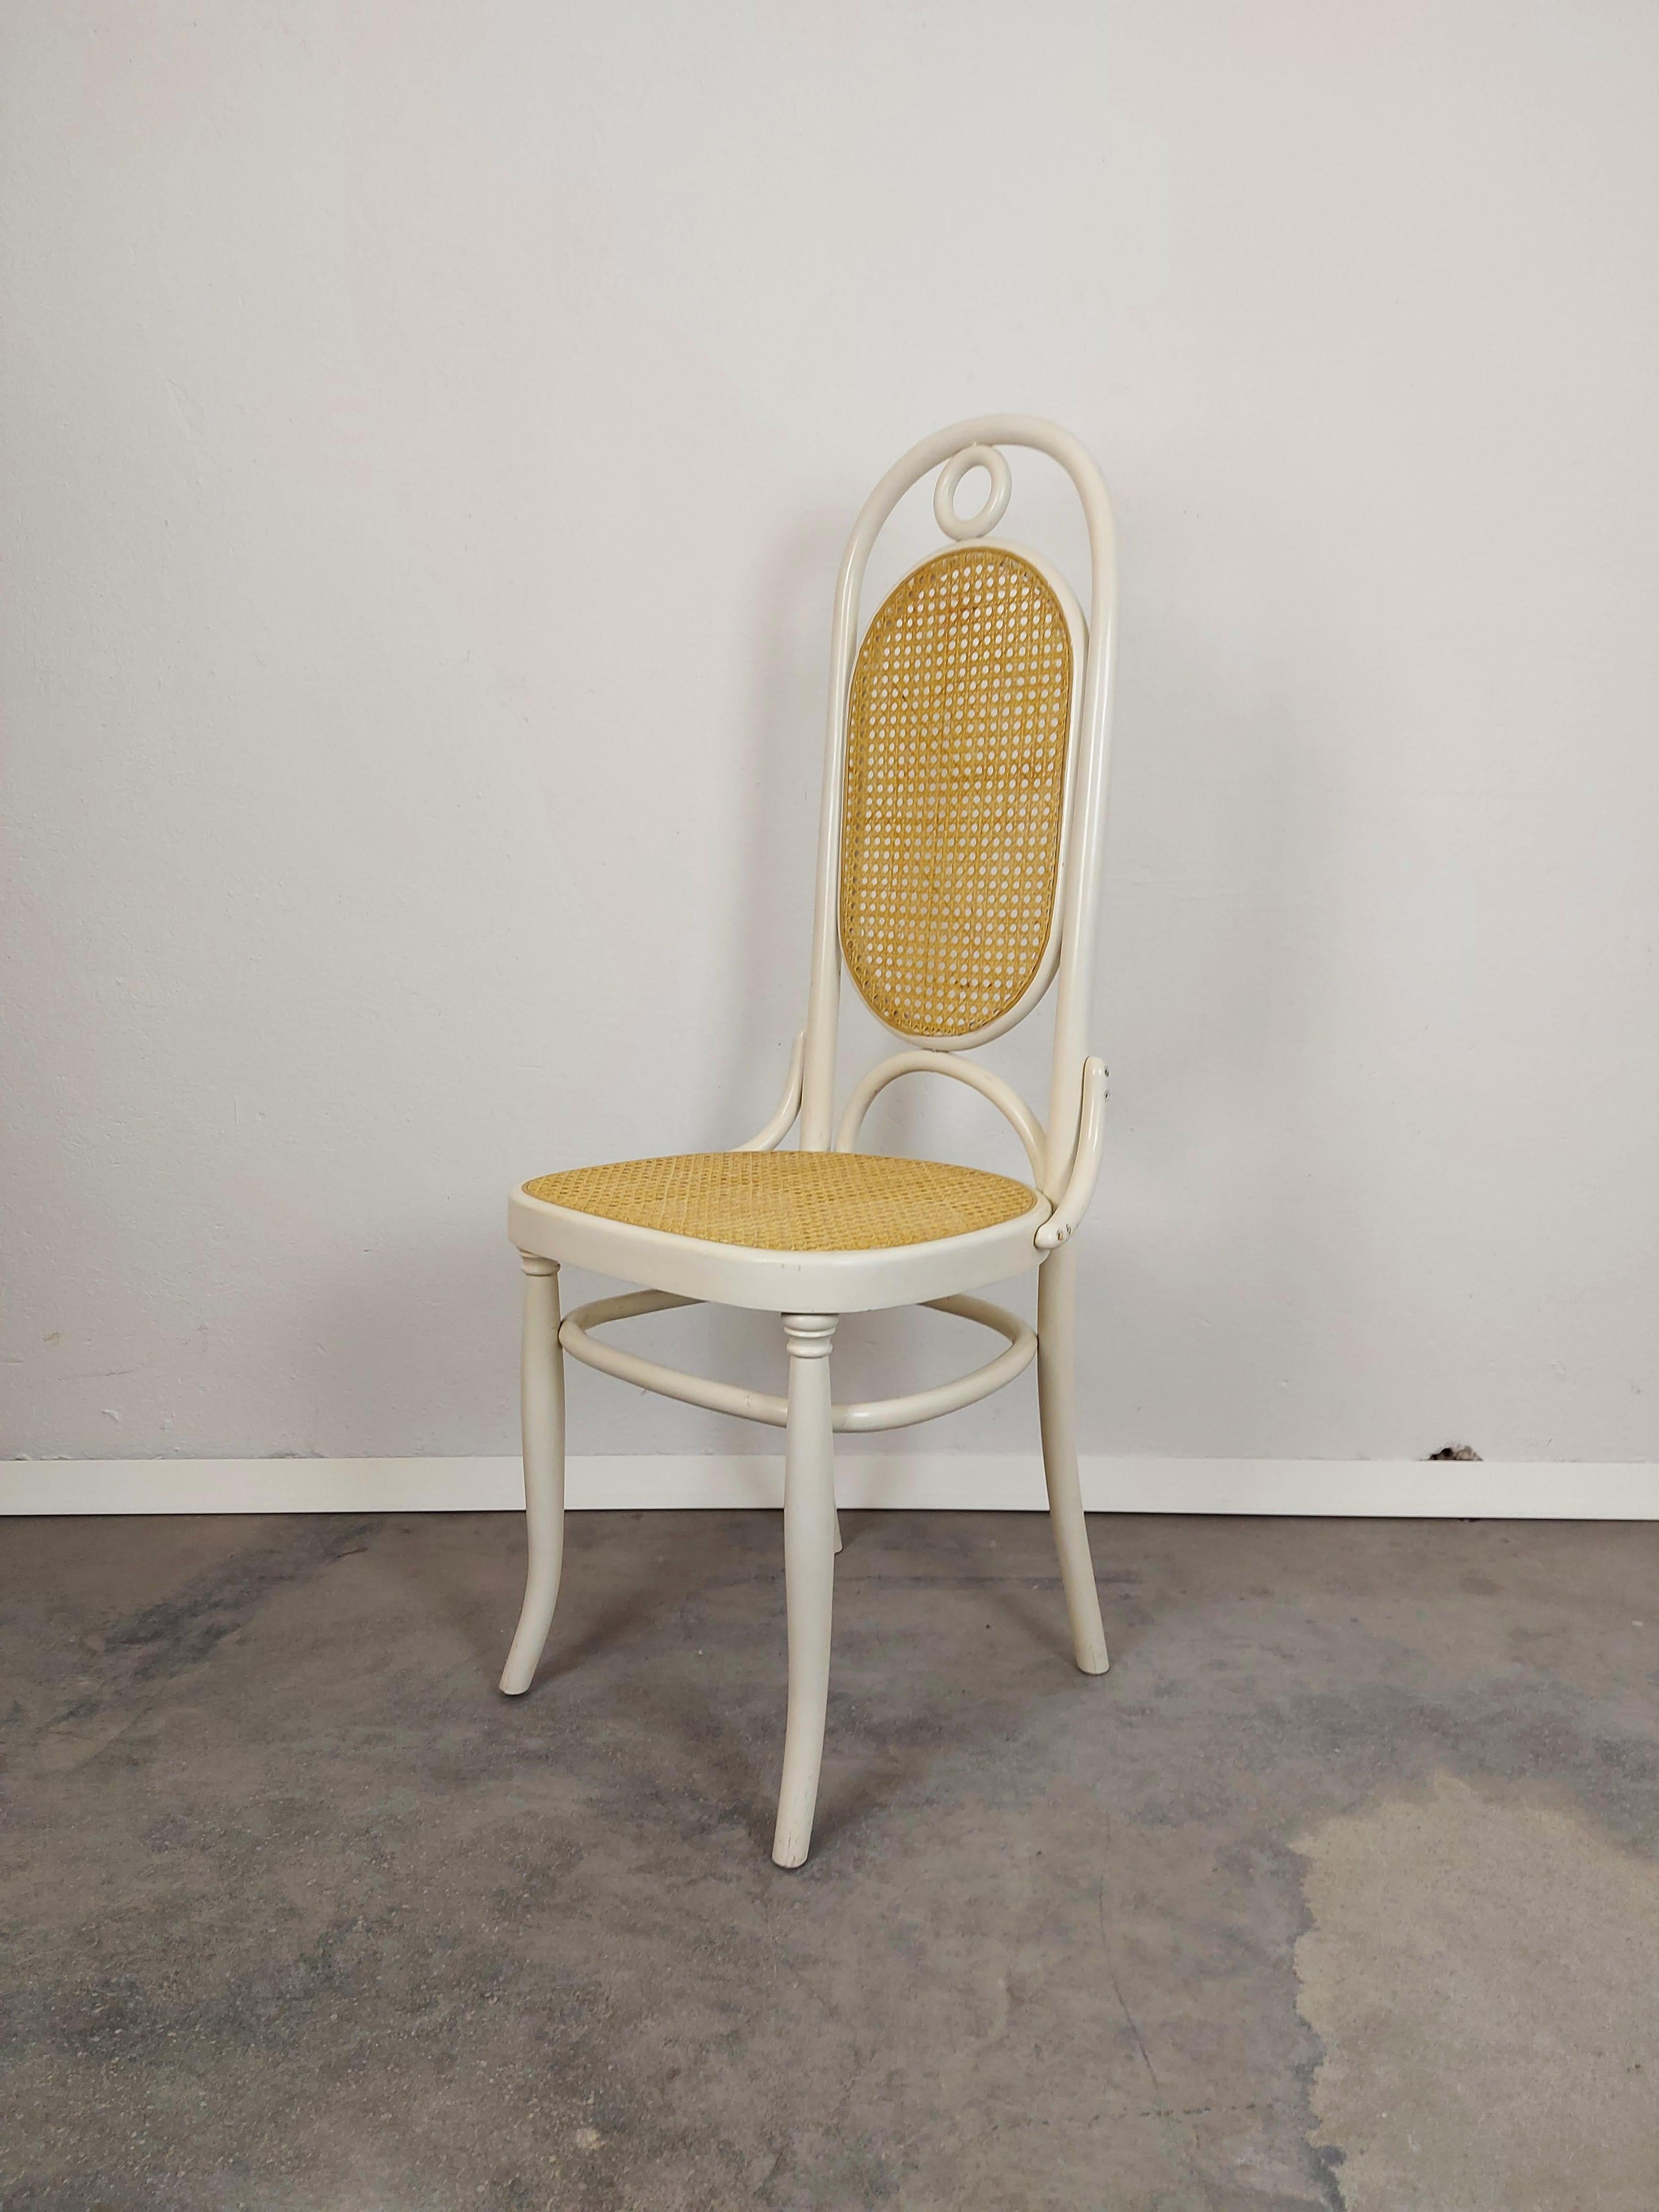 Bentwood cane white dining chairs, No.17
Period: 1940s
Materials: bentwood, cane
Colour: white
Condition: Good condition, original vintage condition, light scratching and wear to the wood around.
Dimensions:
Seat Height: 47 cm
Overall Height: